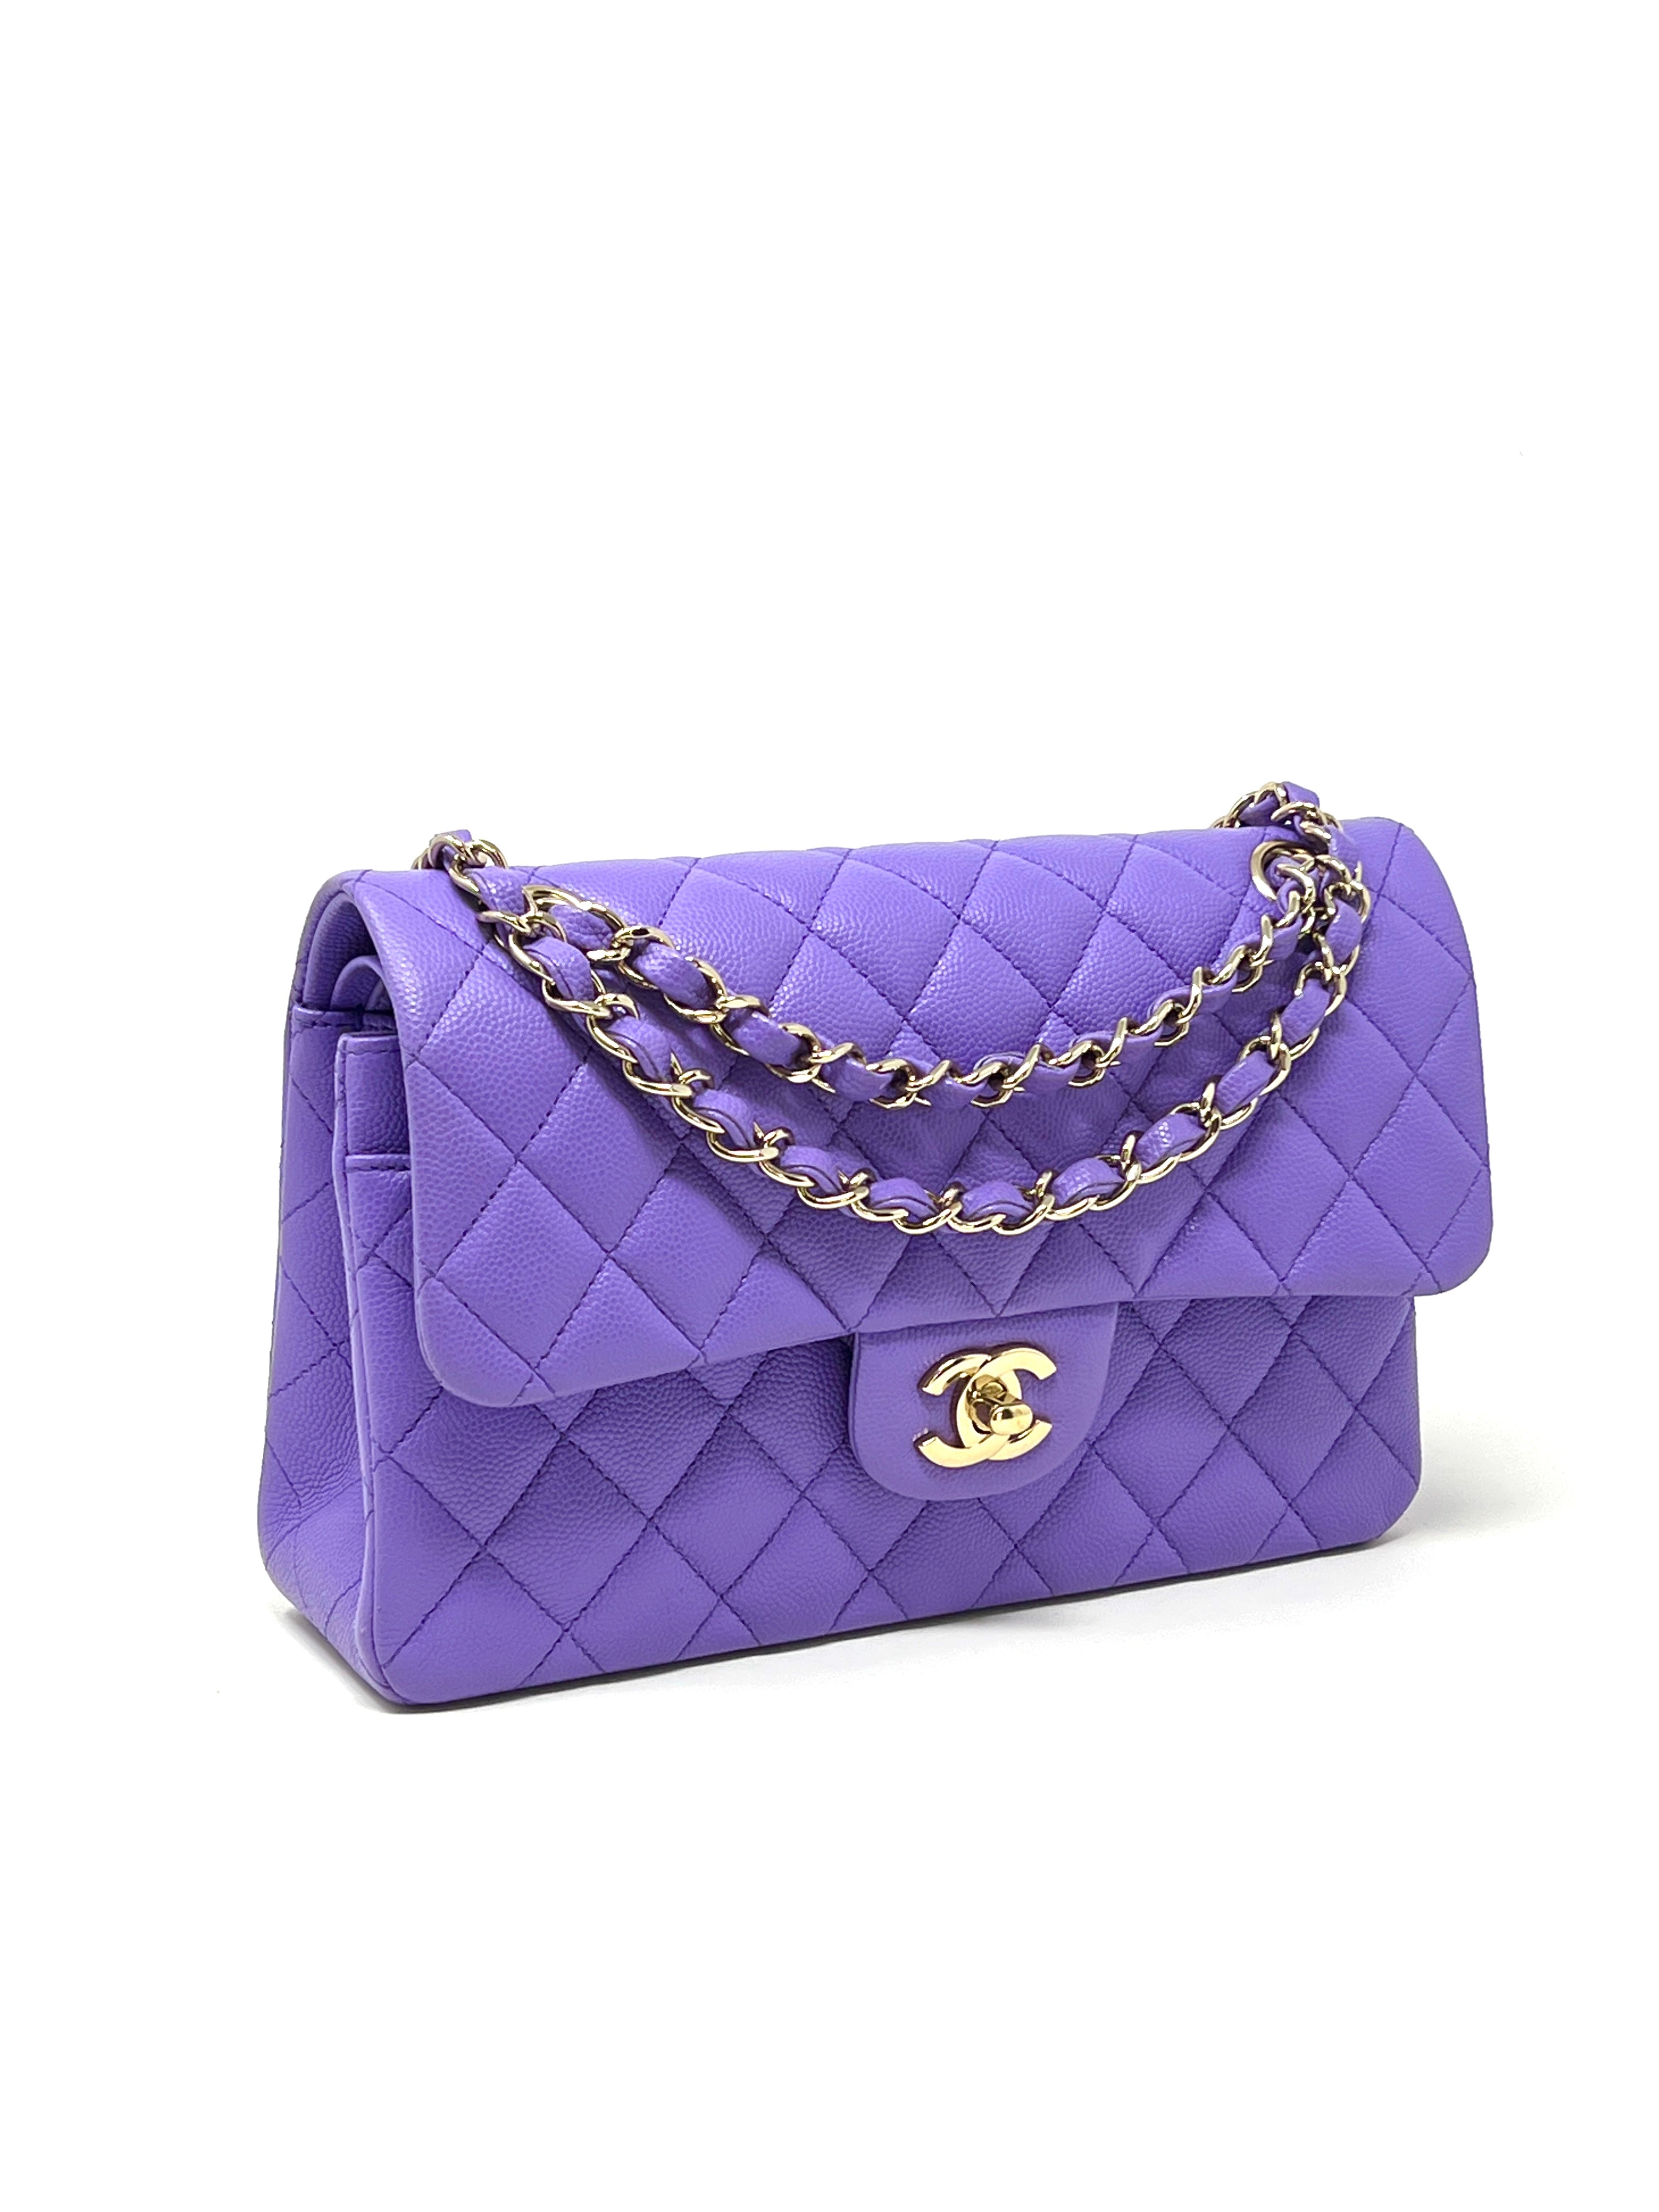 CHANEL Small Classic Double Flap Bag in 20S Dark Pink Caviar